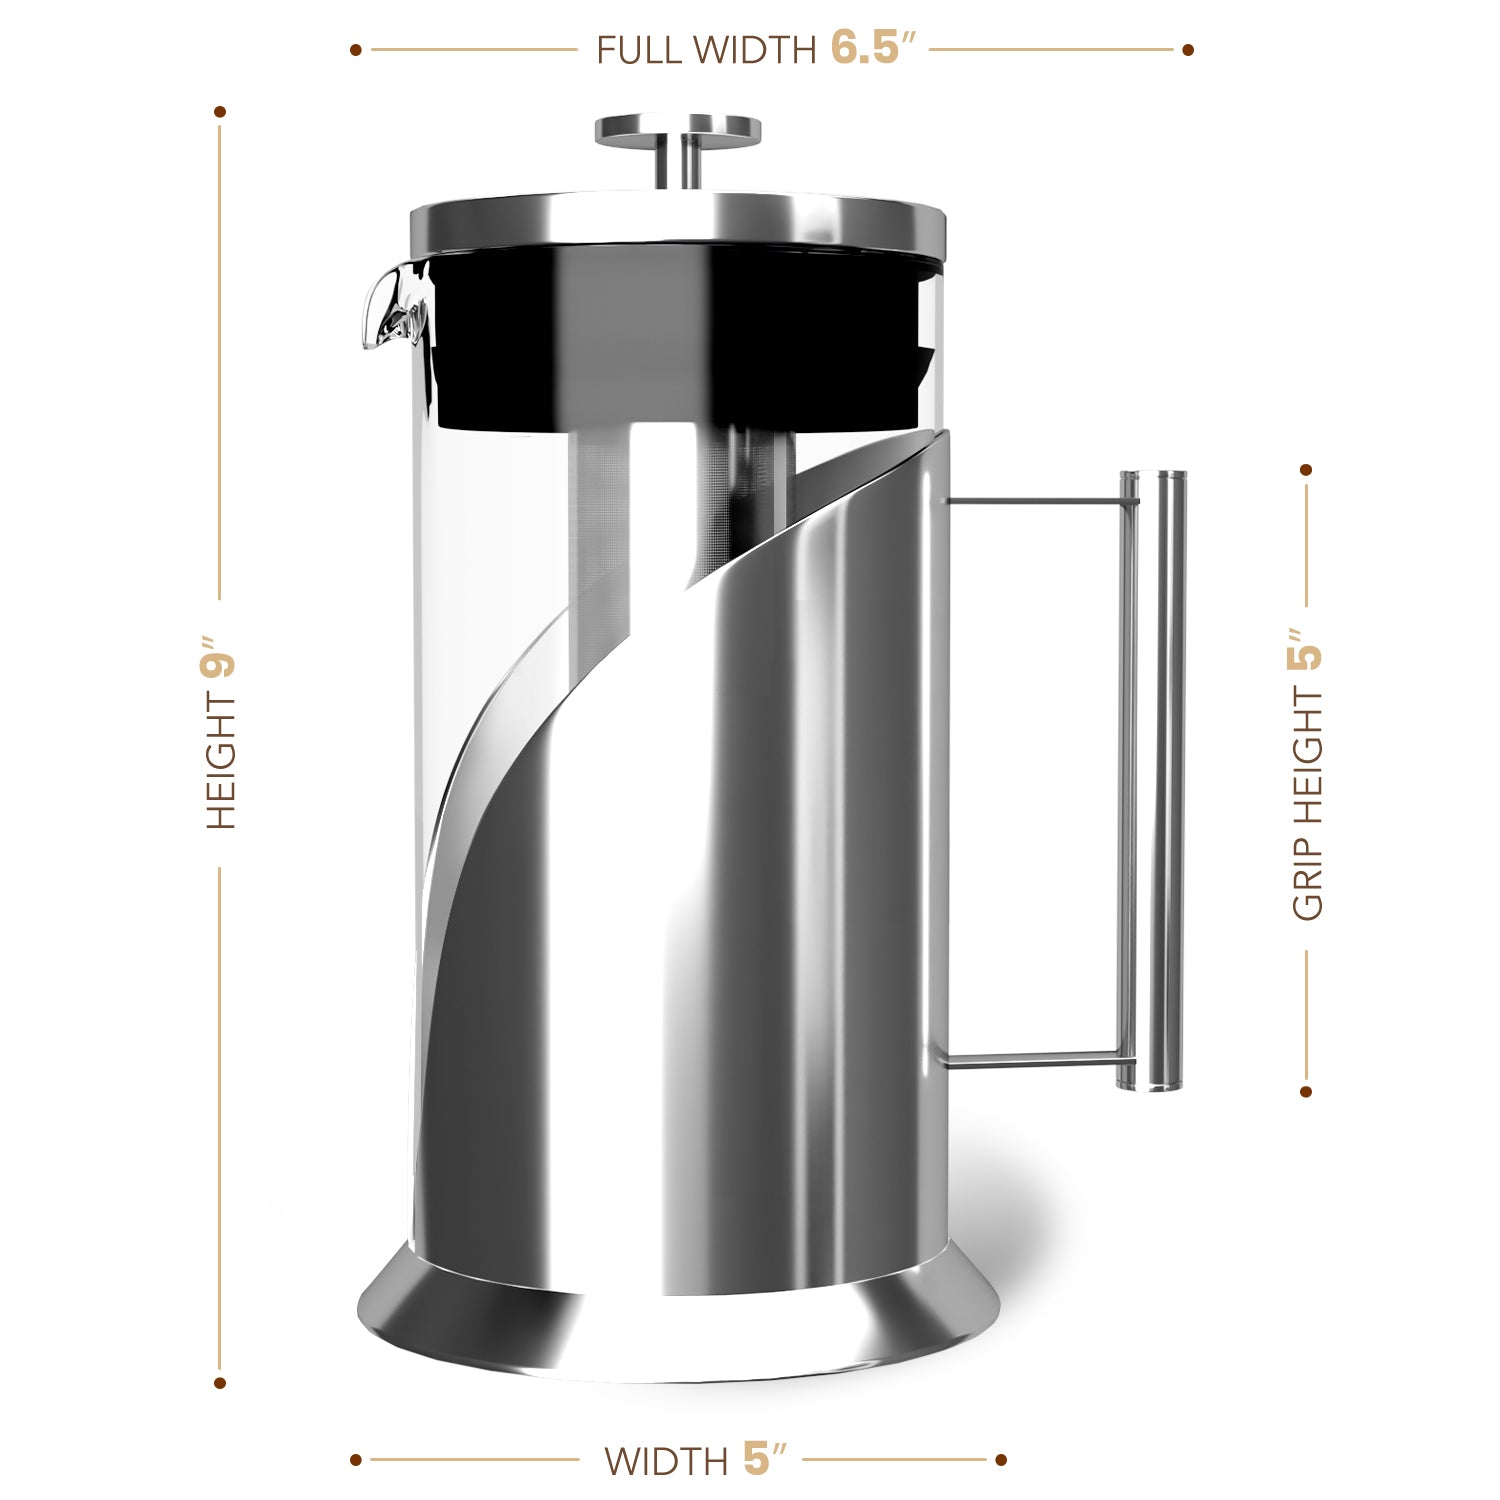 KF9020 Cold Brew Coffee Maker – Kaffe Products